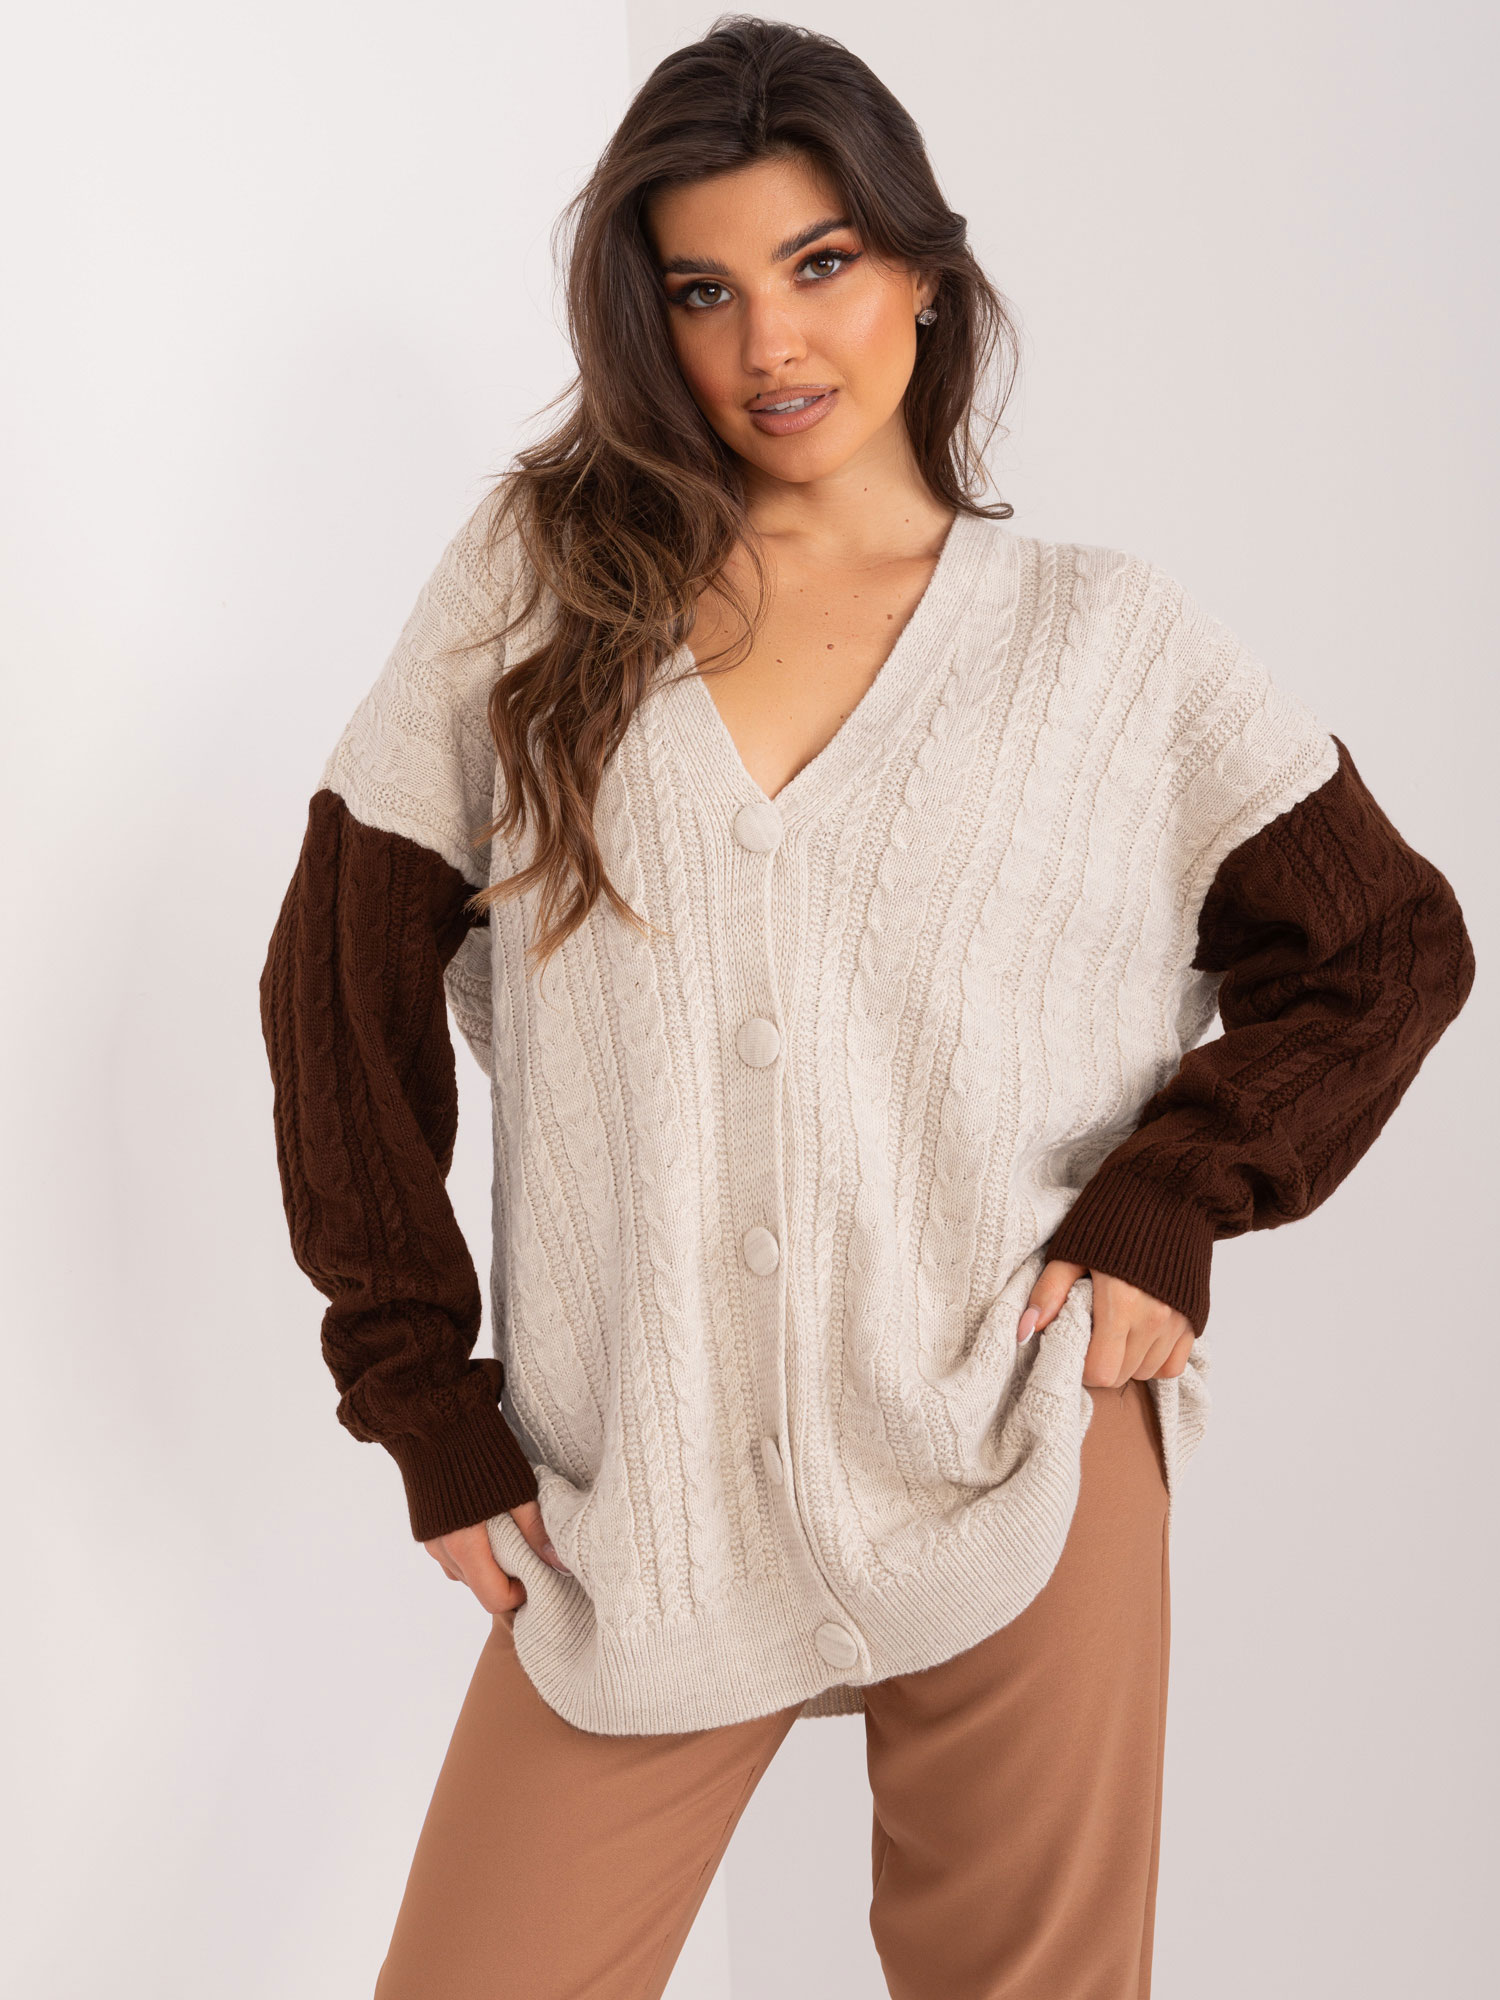 Beige and brown cardigan with a neckline